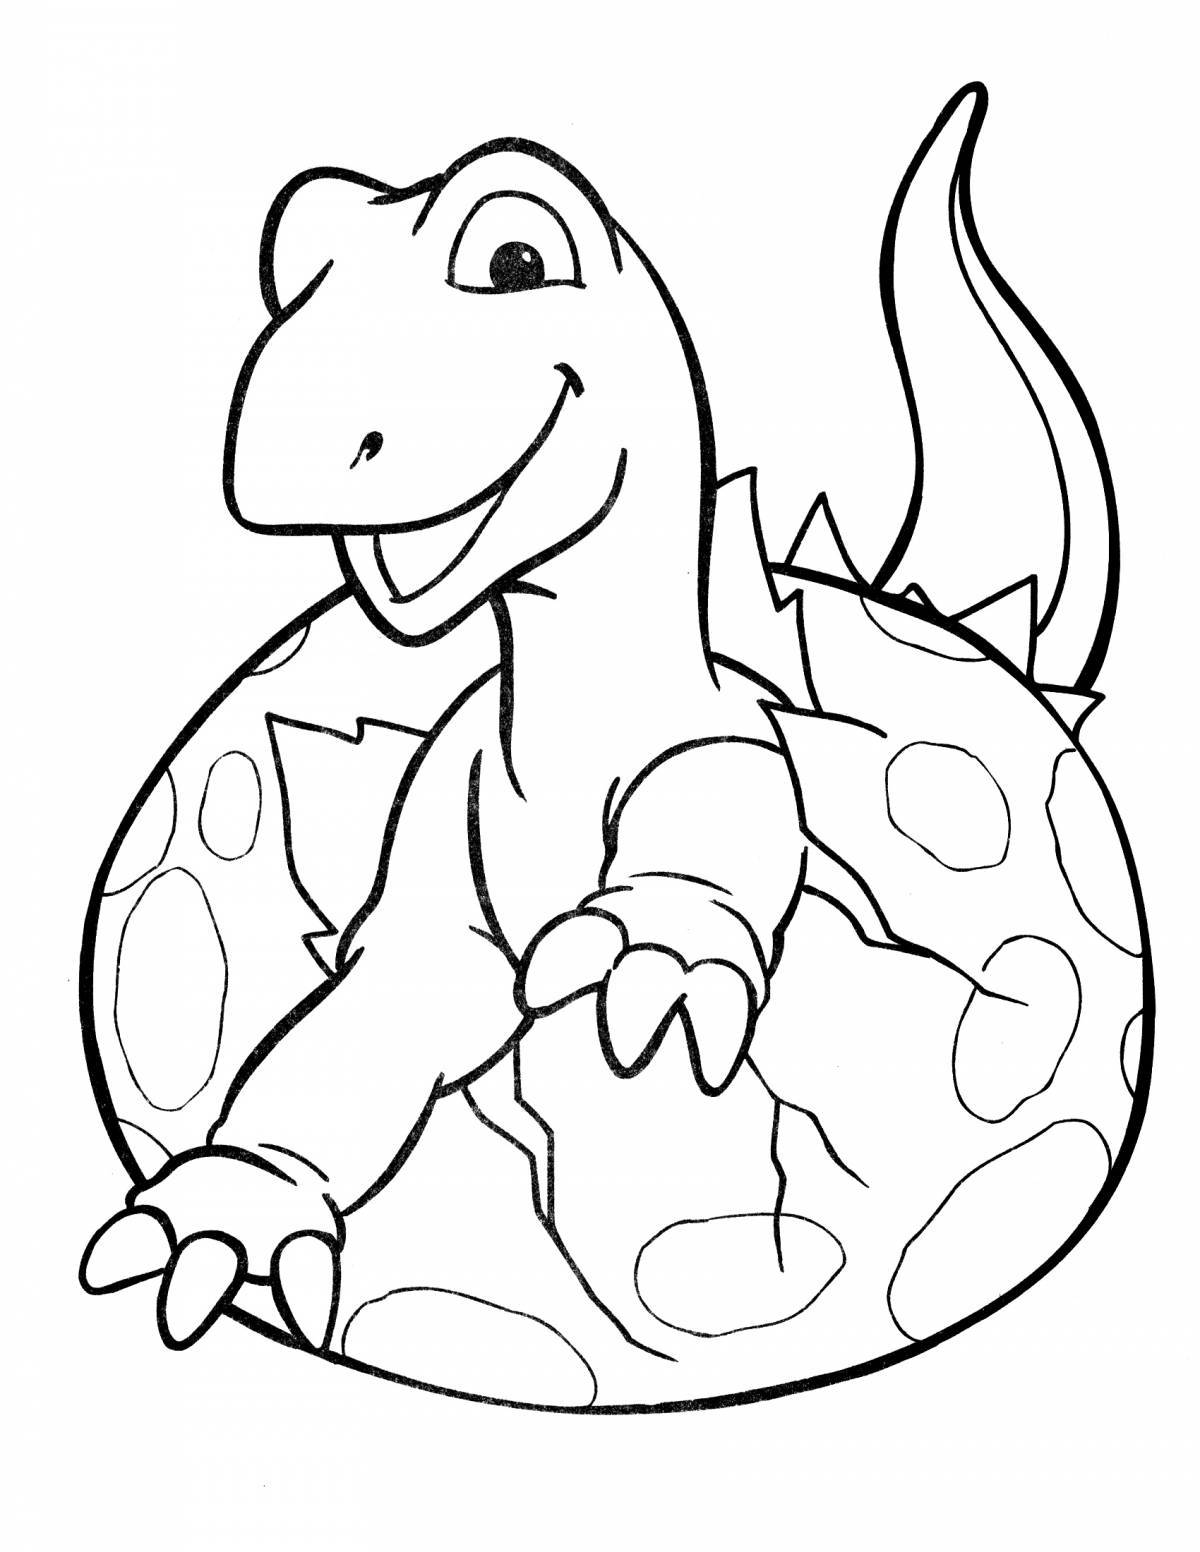 Dinosaur coloring book for kids 3-4 years old